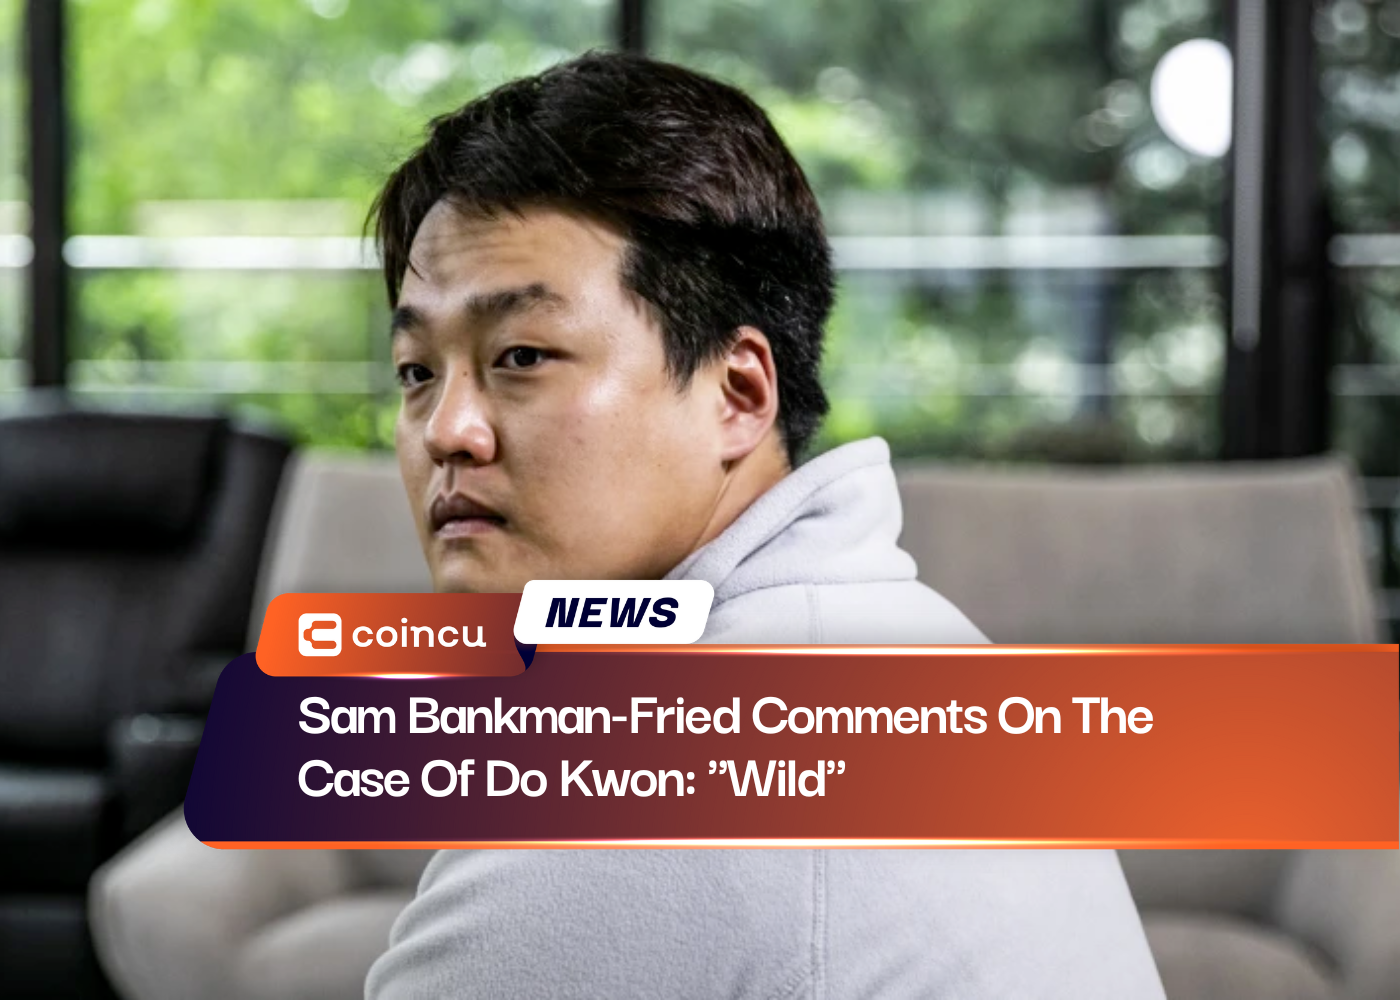 Sam Bankman-Fried Comments On The Case Of Do Kwon: "Wild"